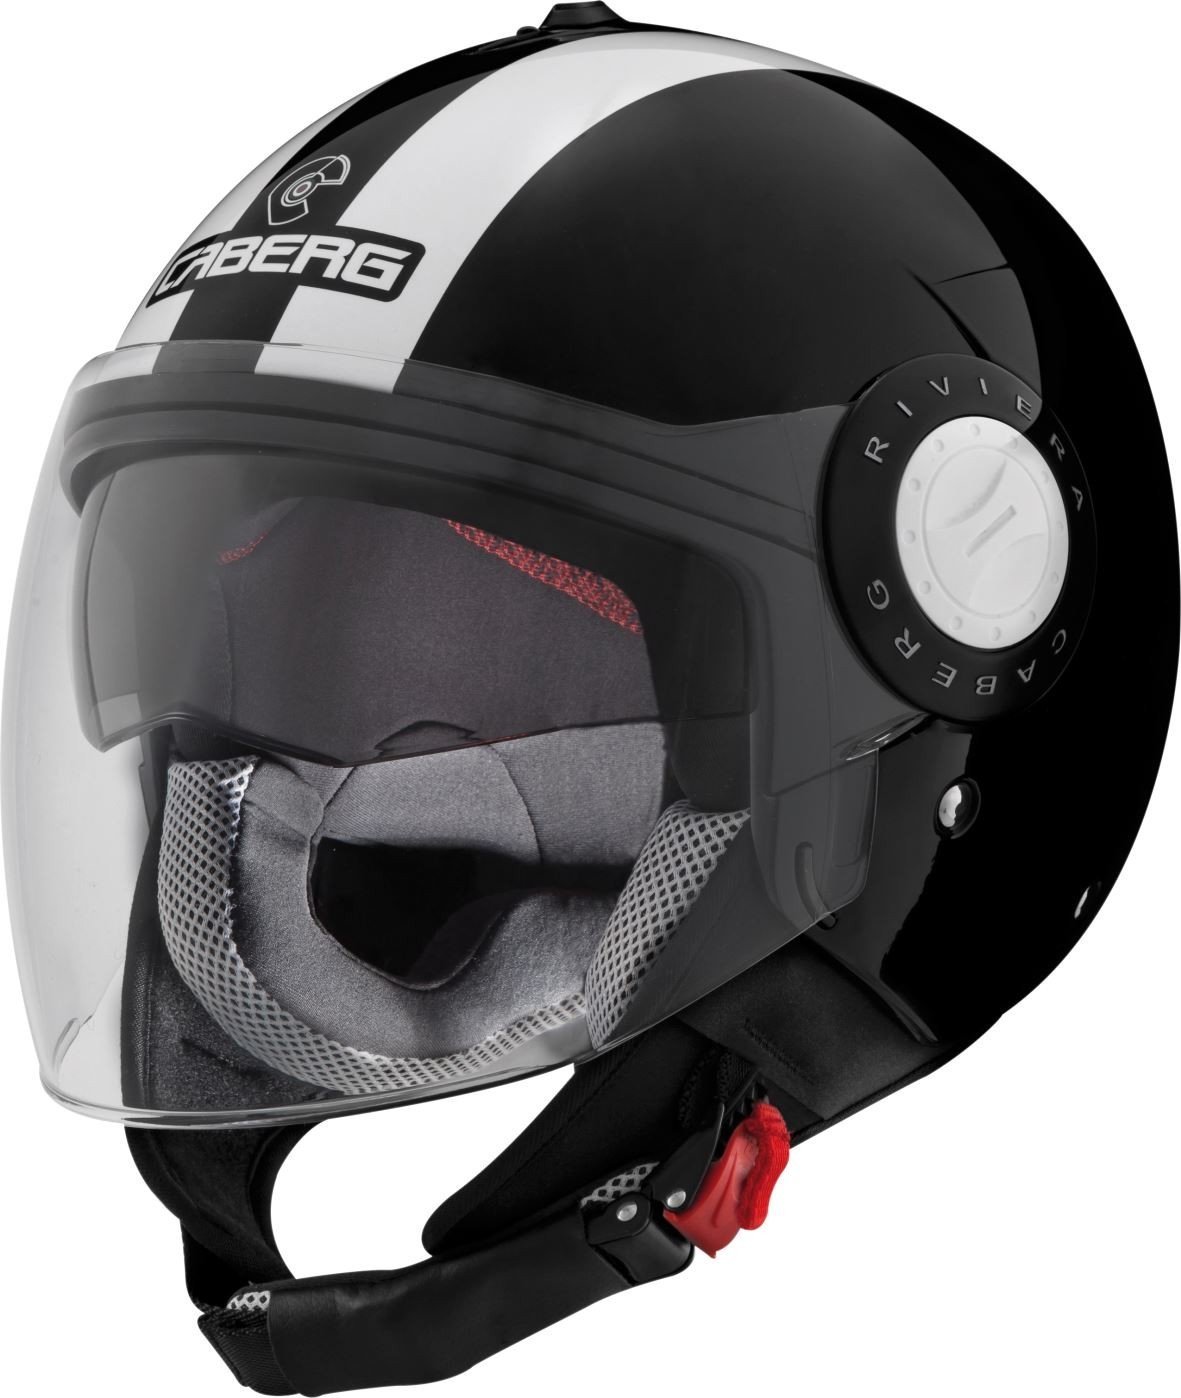 Caberg Riviera v3 Plain Open Face Motorcycle Helmet Scooter Touring Solid Lid